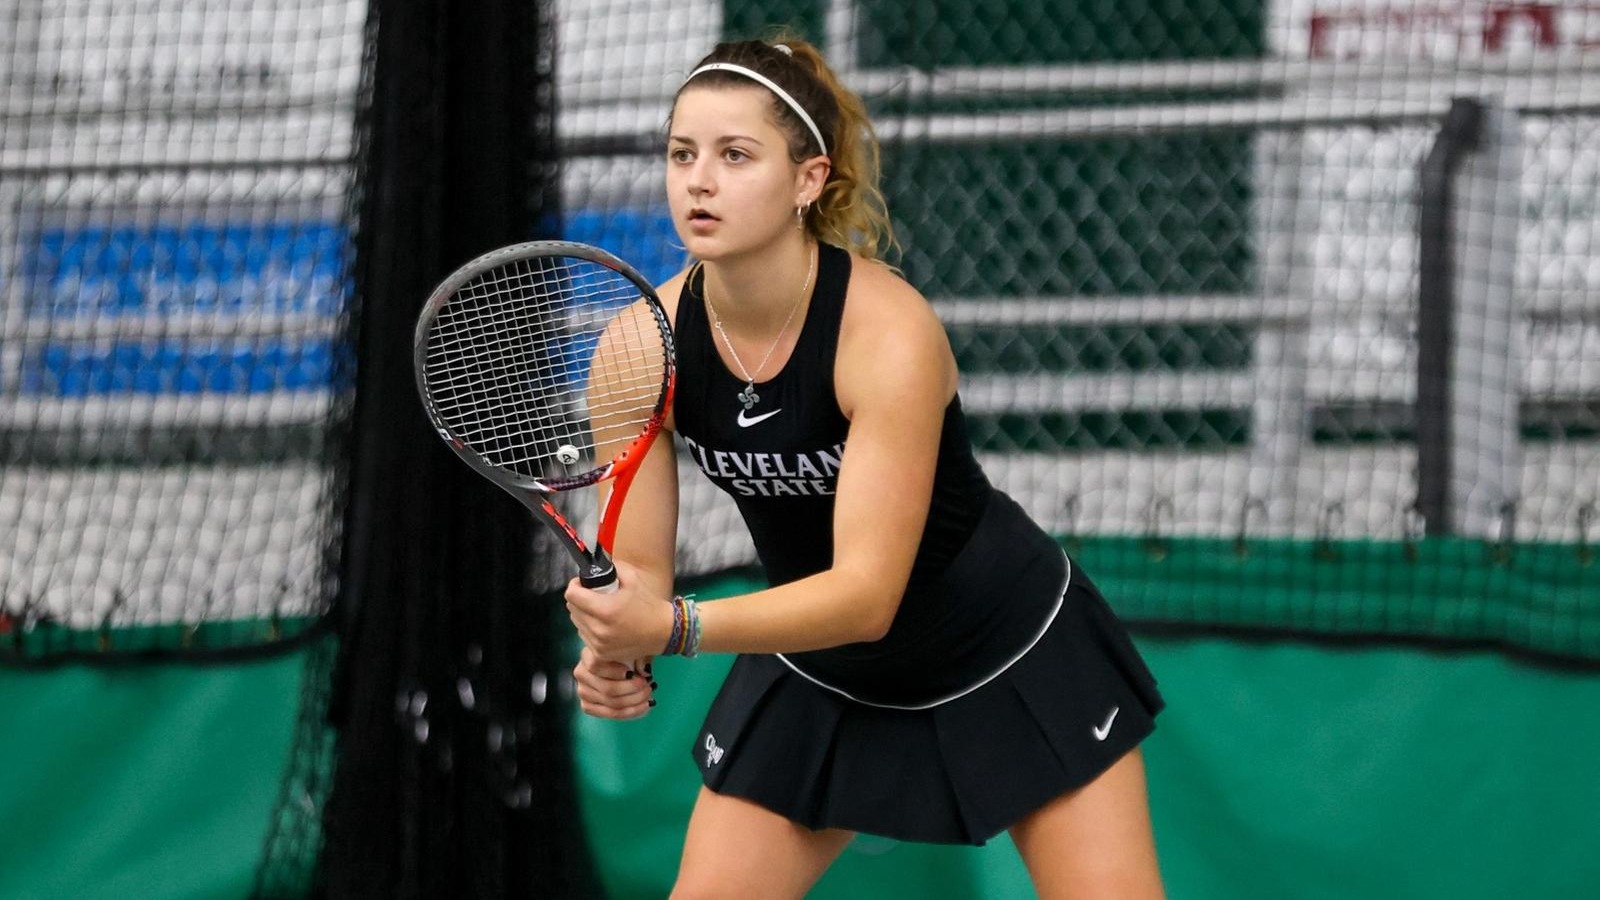 Cleveland State Women’s Tennis Sweeps #HLTennis Weekly Honors